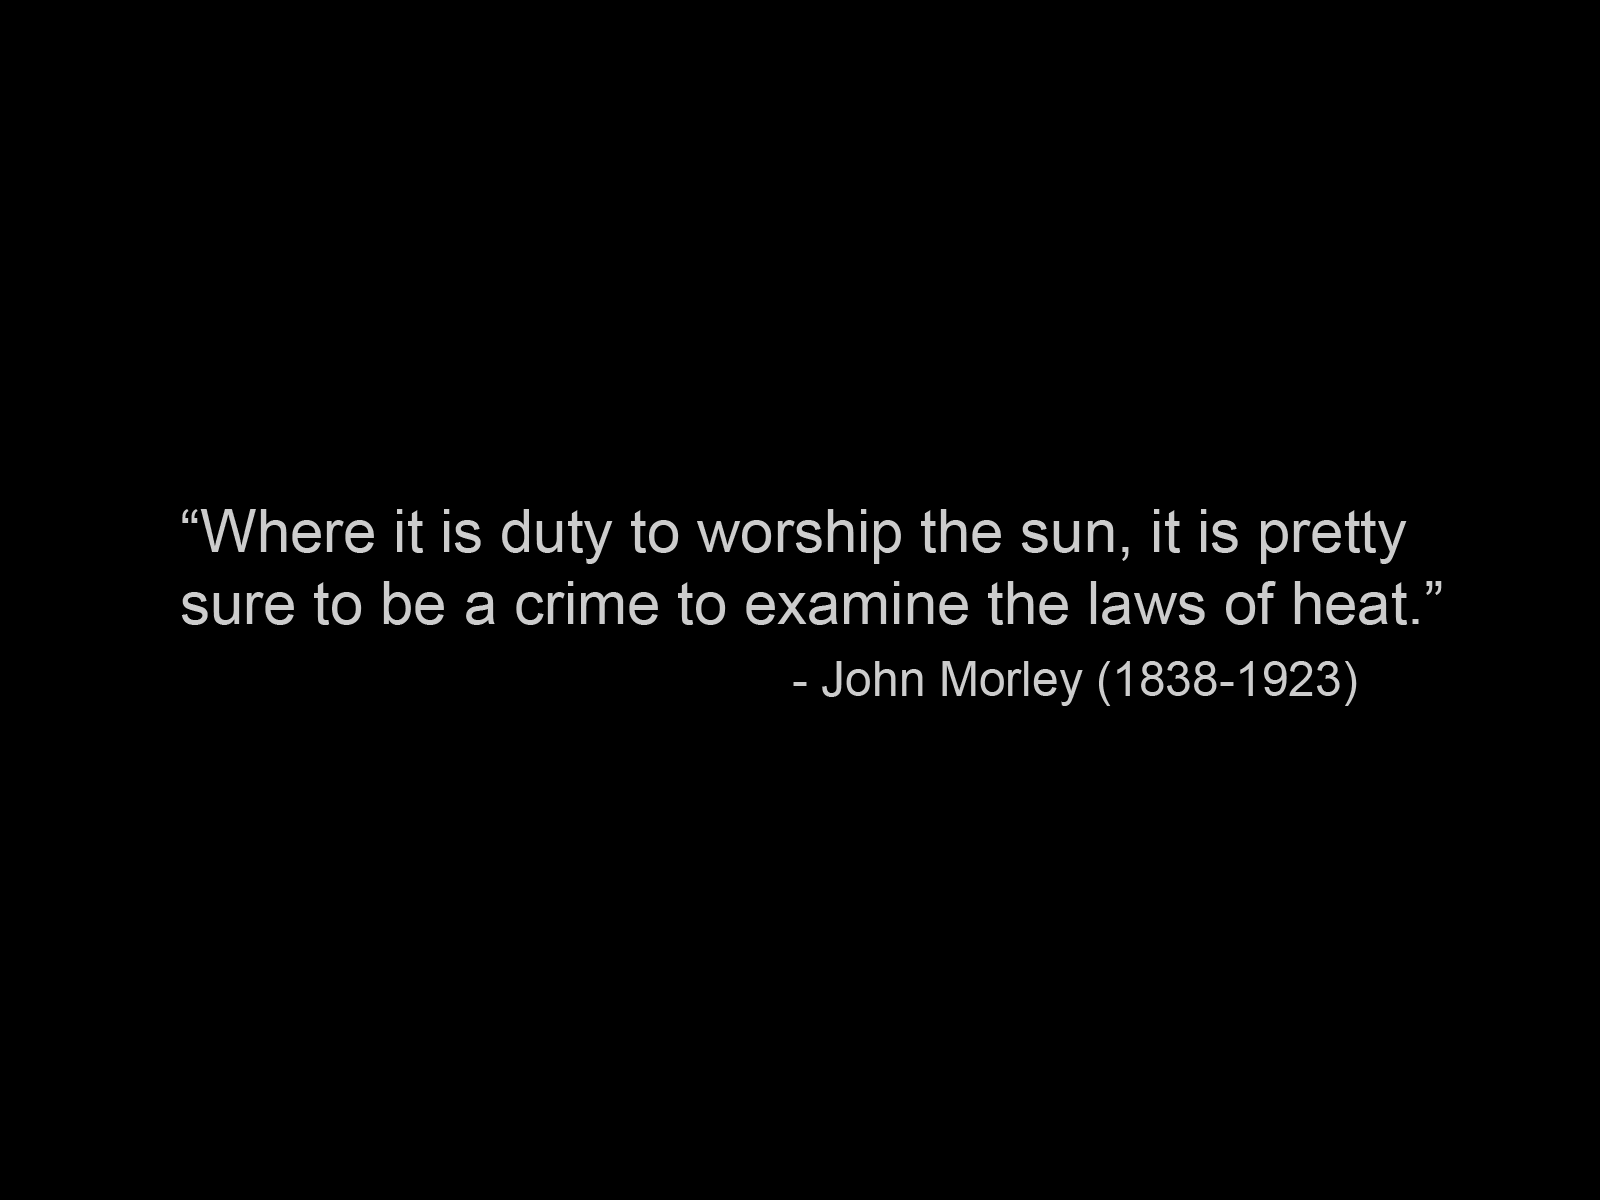 Where it is a duty to worship the sun it is pretty sure to be a crime to examine the laws of heat. John Morley